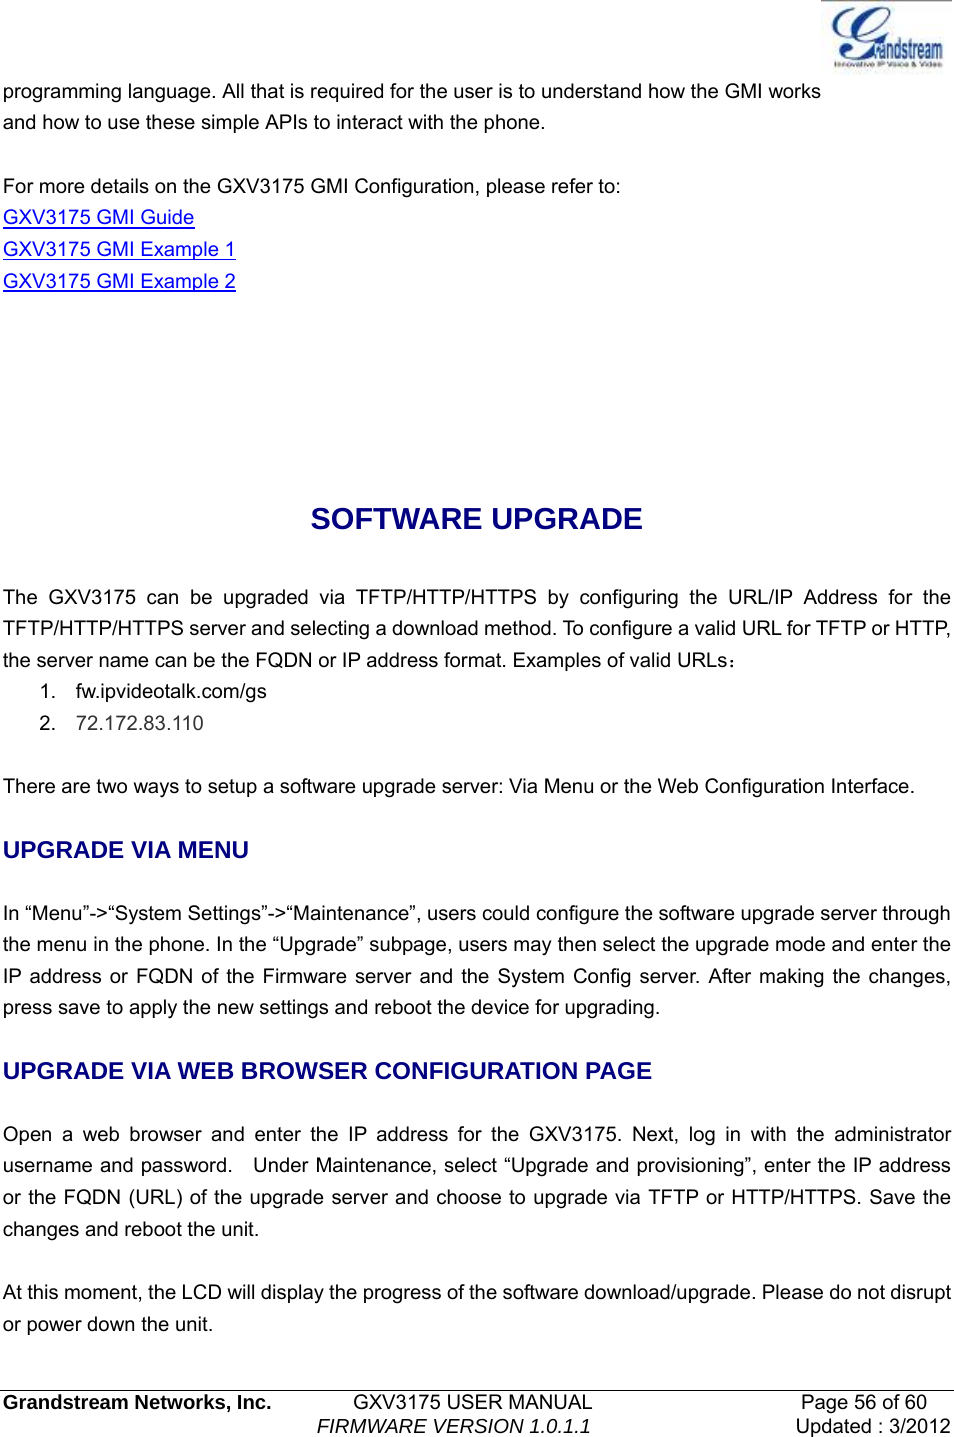   Grandstream Networks, Inc.        GXV3175 USER MANUAL                     Page 56 of 60                                FIRMWARE VERSION 1.0.1.1 Updated : 3/2012  programming language. All that is required for the user is to understand how the GMI works and how to use these simple APIs to interact with the phone.  For more details on the GXV3175 GMI Configuration, please refer to: GXV3175 GMI Guide GXV3175 GMI Example 1 GXV3175 GMI Example 2    SOFTWARE UPGRADE  The GXV3175 can be upgraded via TFTP/HTTP/HTTPS by configuring the URL/IP Address for the TFTP/HTTP/HTTPS server and selecting a download method. To configure a valid URL for TFTP or HTTP, the server name can be the FQDN or IP address format. Examples of valid URLs： 1. fw.ipvideotalk.com/gs 2.  72.172.83.110  There are two ways to setup a software upgrade server: Via Menu or the Web Configuration Interface.  UPGRADE VIA MENU  In “Menu”-&gt;“System Settings”-&gt;“Maintenance”, users could configure the software upgrade server through the menu in the phone. In the “Upgrade” subpage, users may then select the upgrade mode and enter the IP address or FQDN of the Firmware server and the System Config server. After making the changes, press save to apply the new settings and reboot the device for upgrading.  UPGRADE VIA WEB BROWSER CONFIGURATION PAGE  Open a web browser and enter the IP address for the GXV3175. Next, log in with the administrator username and password.    Under Maintenance, select “Upgrade and provisioning”, enter the IP address or the FQDN (URL) of the upgrade server and choose to upgrade via TFTP or HTTP/HTTPS. Save the changes and reboot the unit.  At this moment, the LCD will display the progress of the software download/upgrade. Please do not disrupt or power down the unit. 